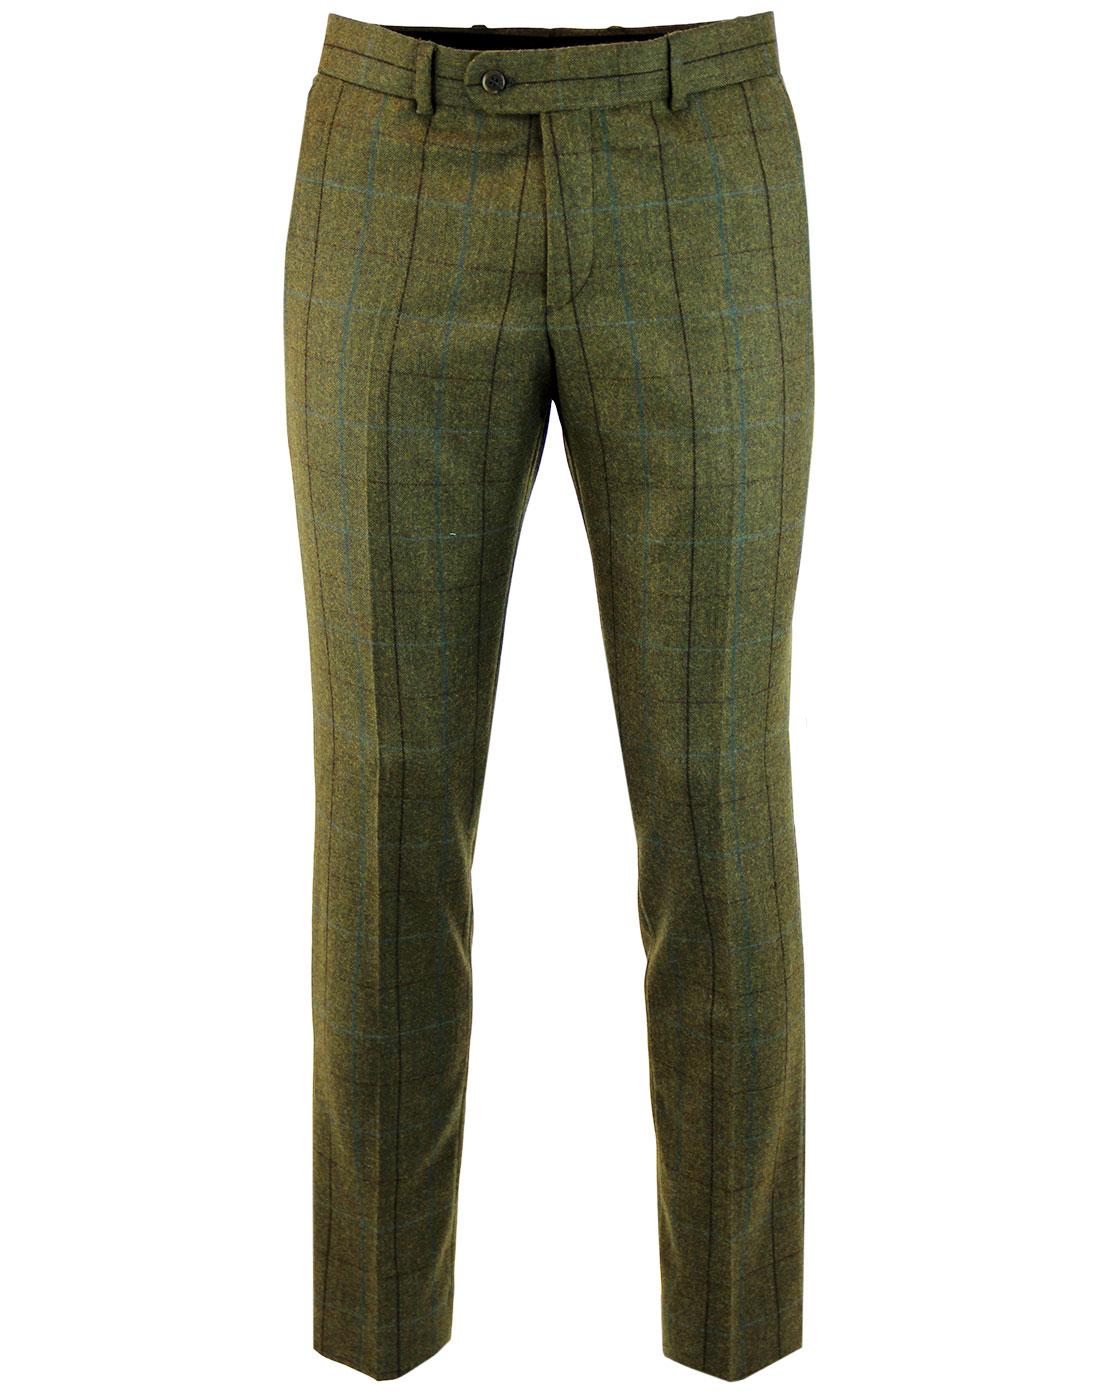 Retro Mod Windowpane Country Check Suit Trousers G